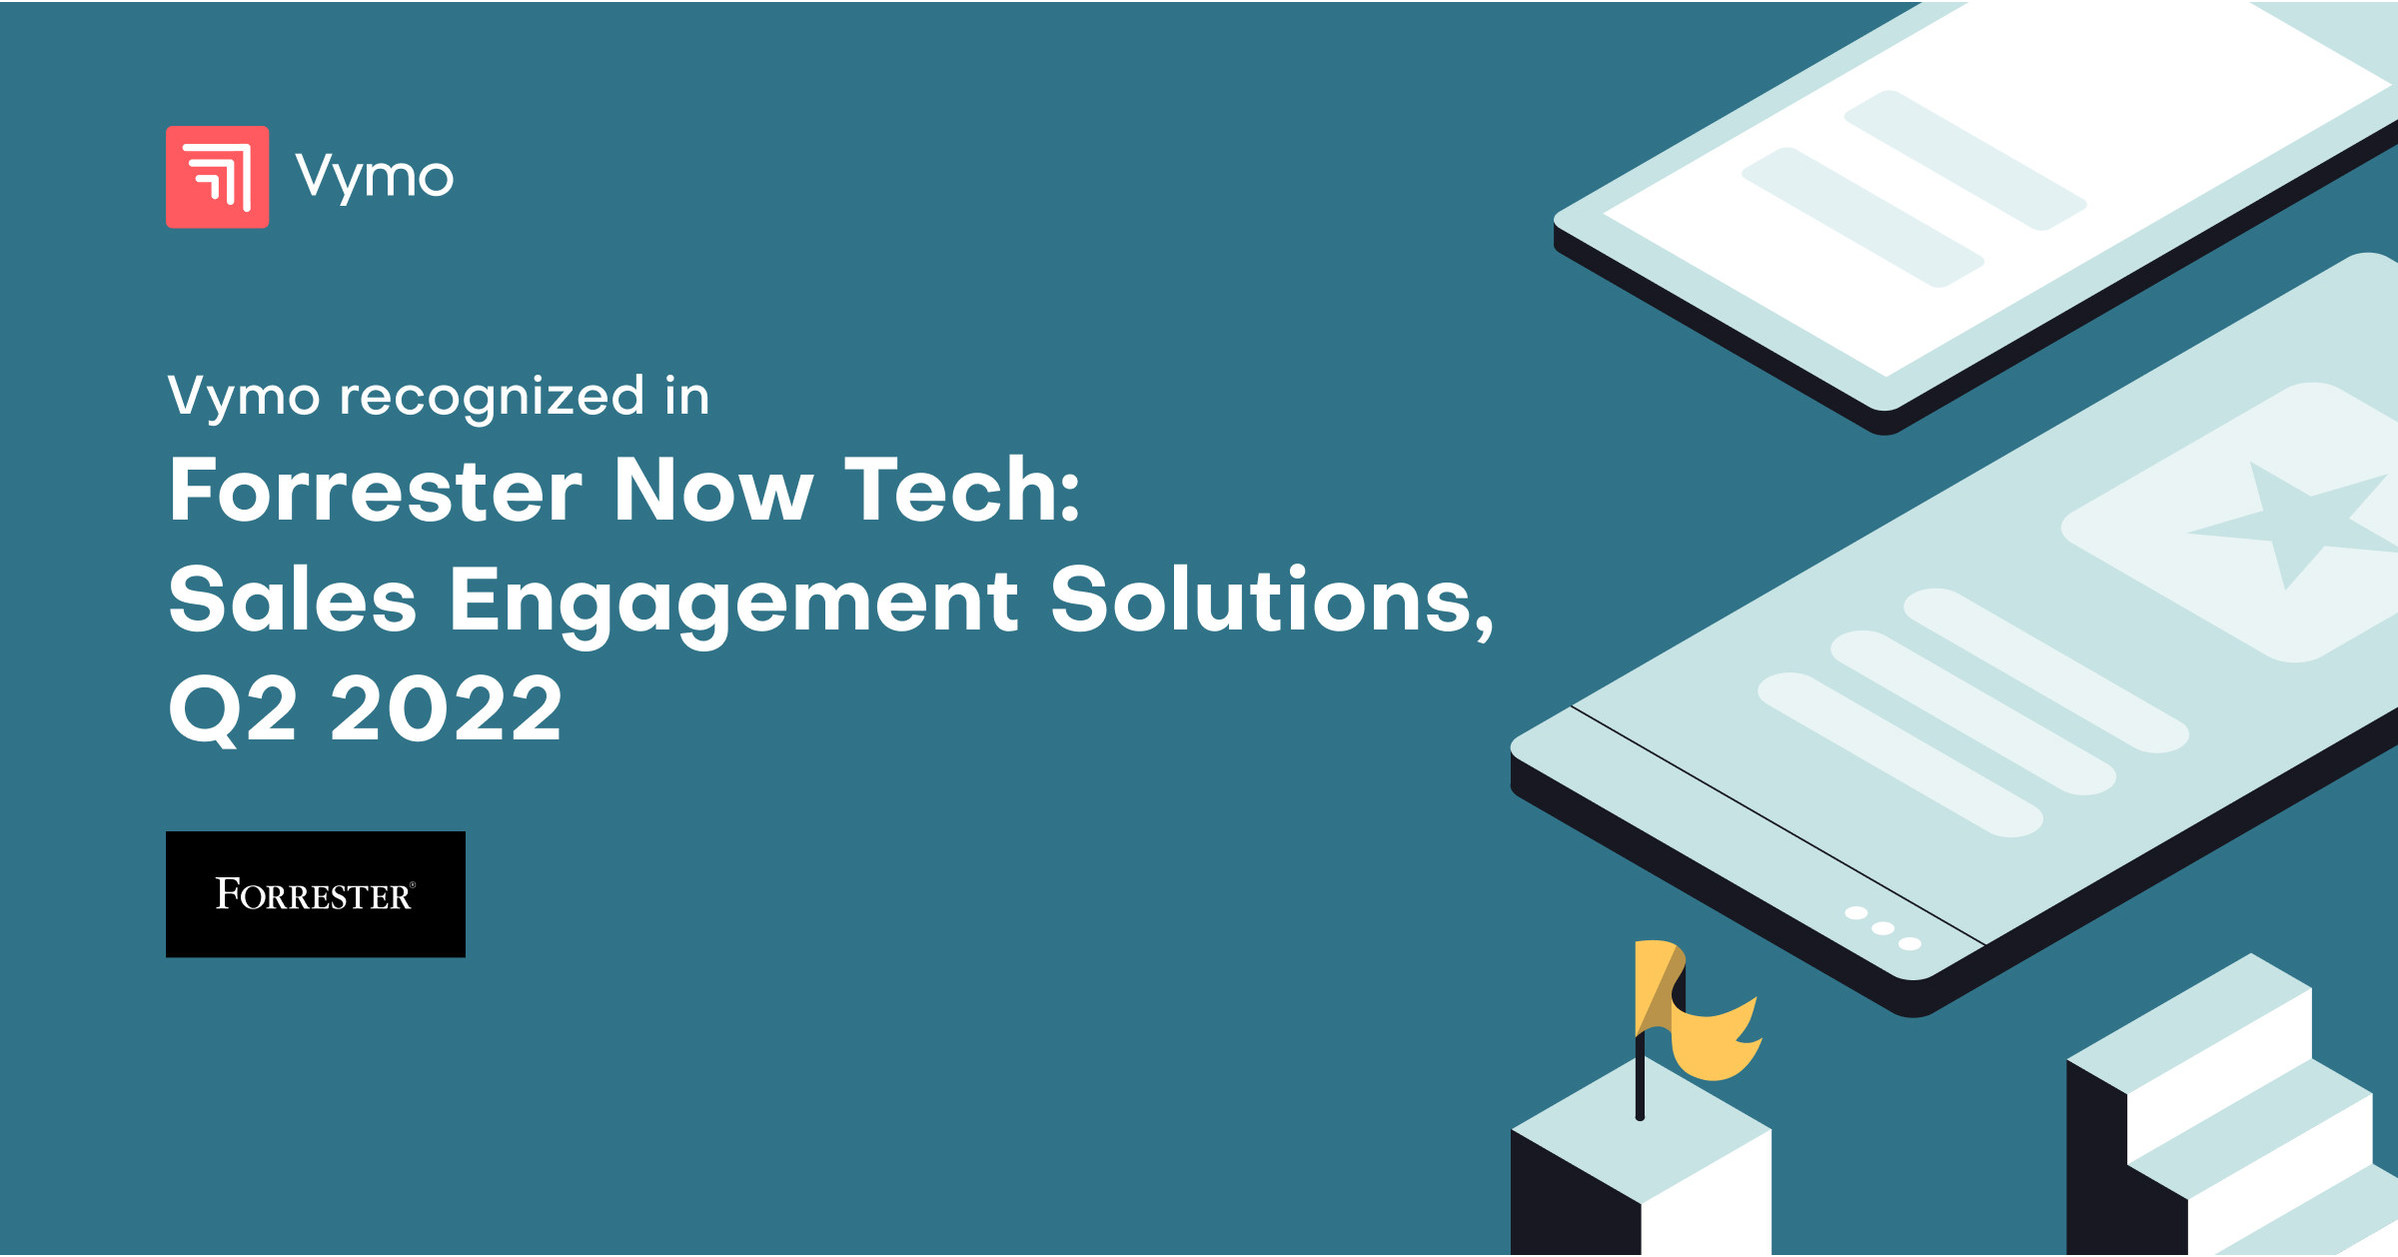 Vymo Recognized in Now Tech: Sales Engagement Solutions Report